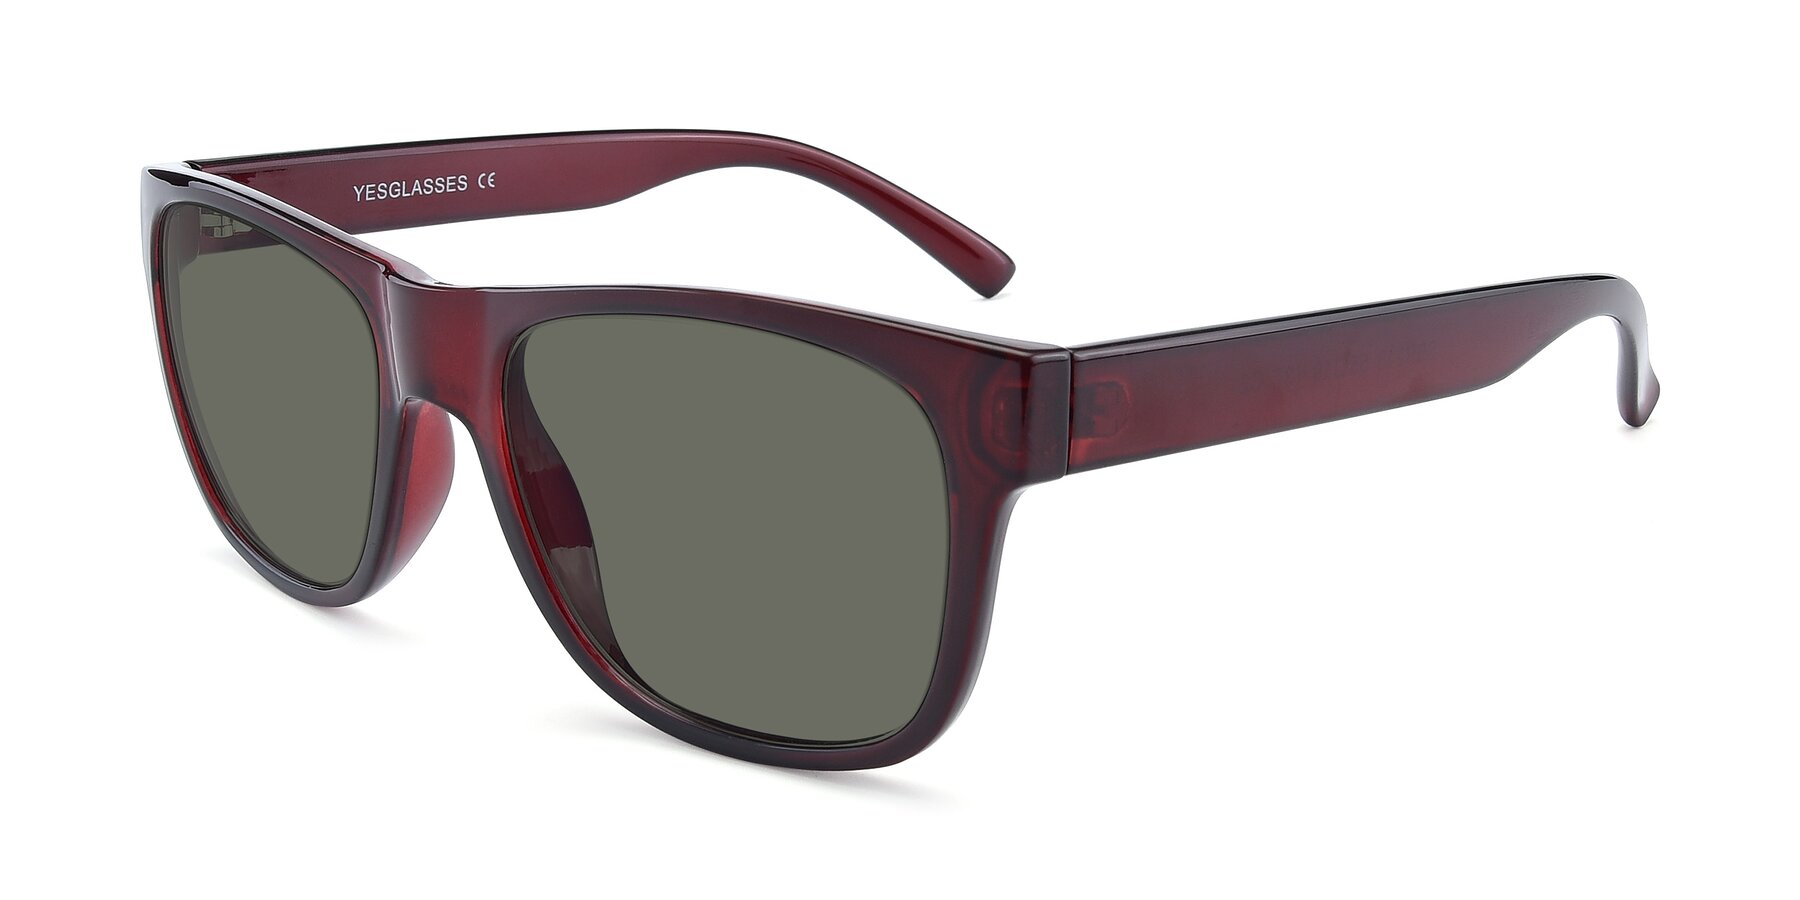 Angle of SSR213 in Wine with Gray Polarized Lenses